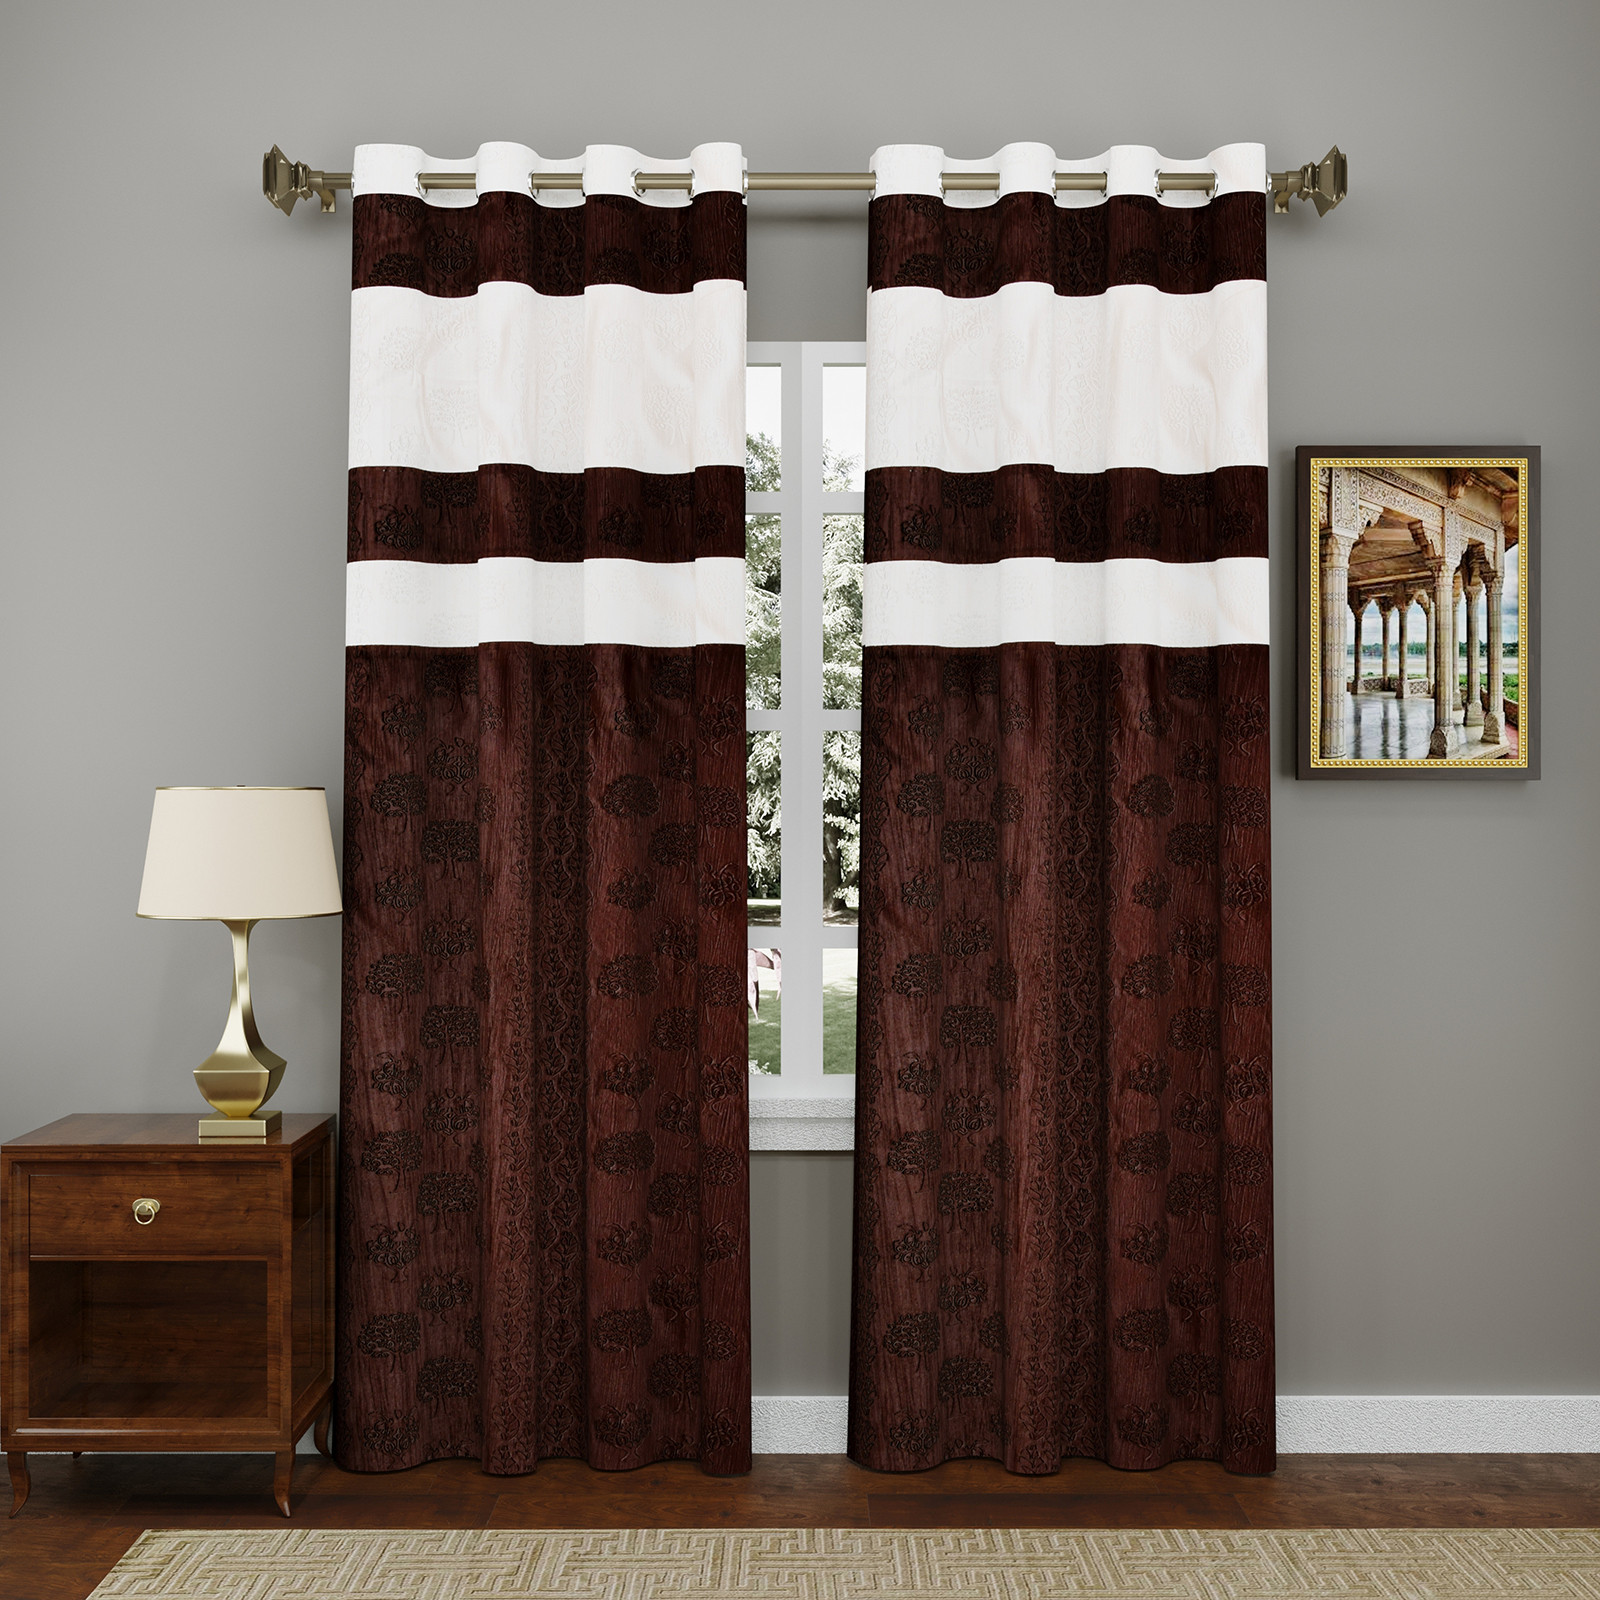 Kuber Industries Forest Printed 7 Feet Door Curtain For Living Room, Bed Room, Kids Room With 8 Eyelet (Brown & Cream)-HS43KUBMART25605